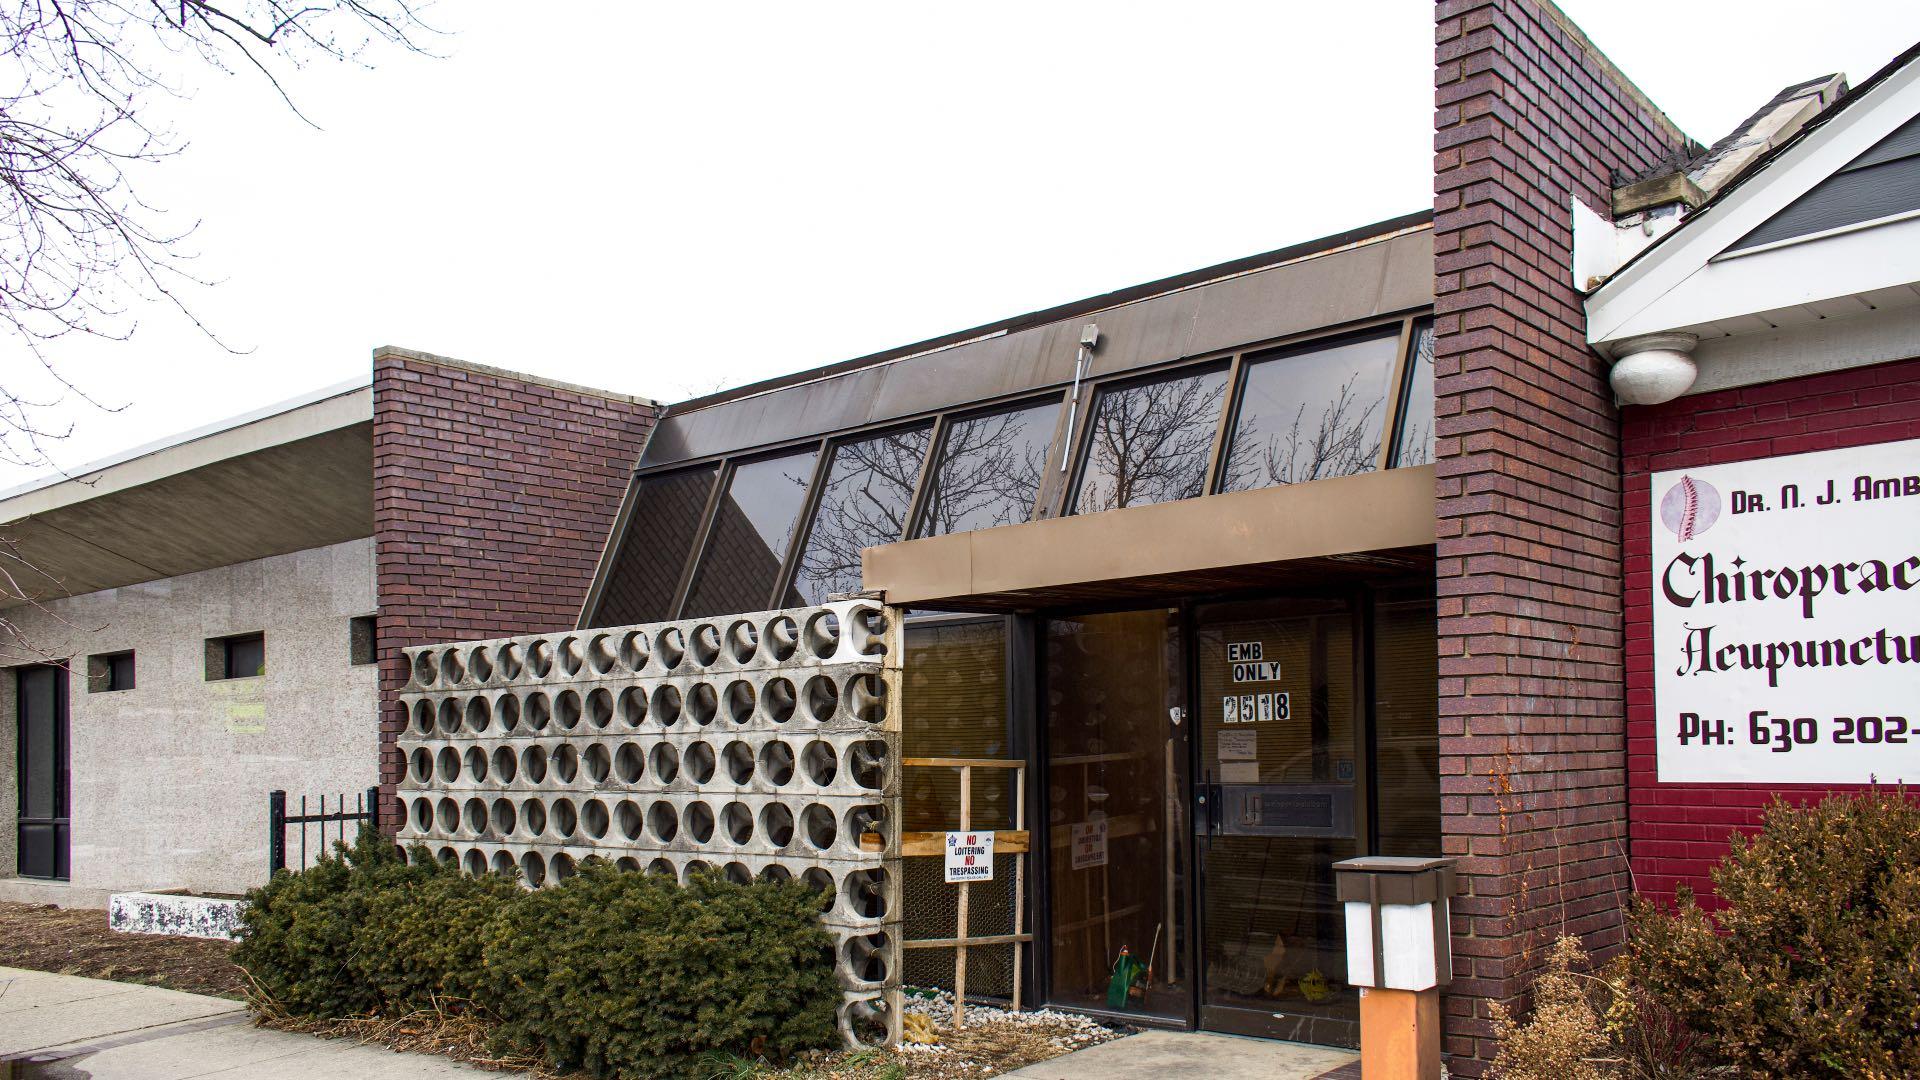 A Midcentury Modern office building on Peterson Avenue, one of several on a stretch that spans from West Ridge to North Park. (Preservation Chicago / Max Chavez)